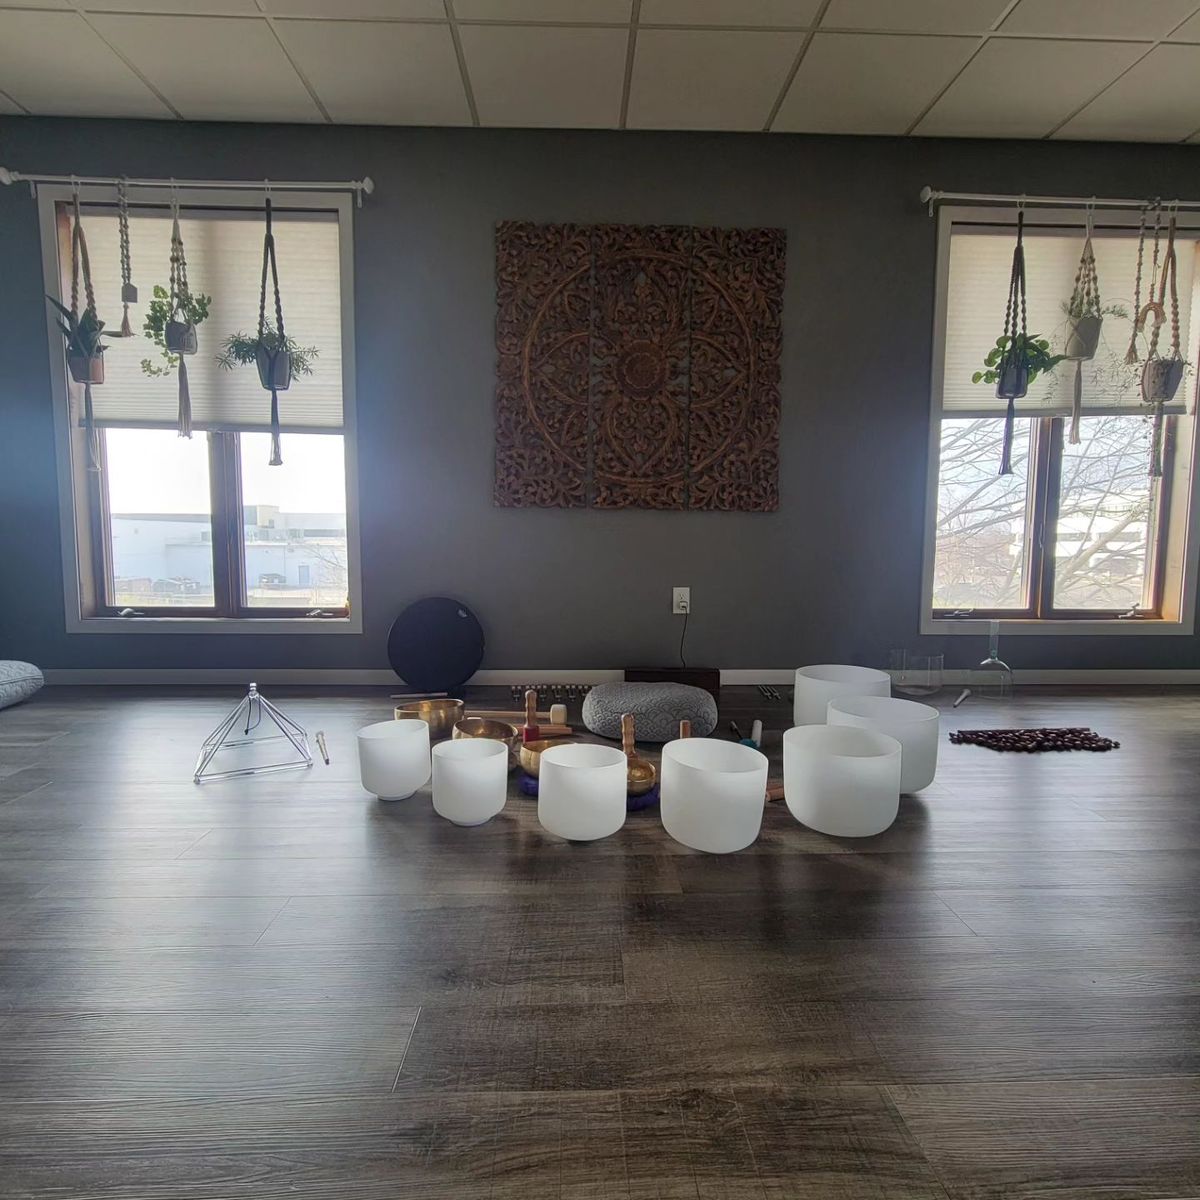 Full Moon Harmonies: A Reiki and Sound Healing Experience